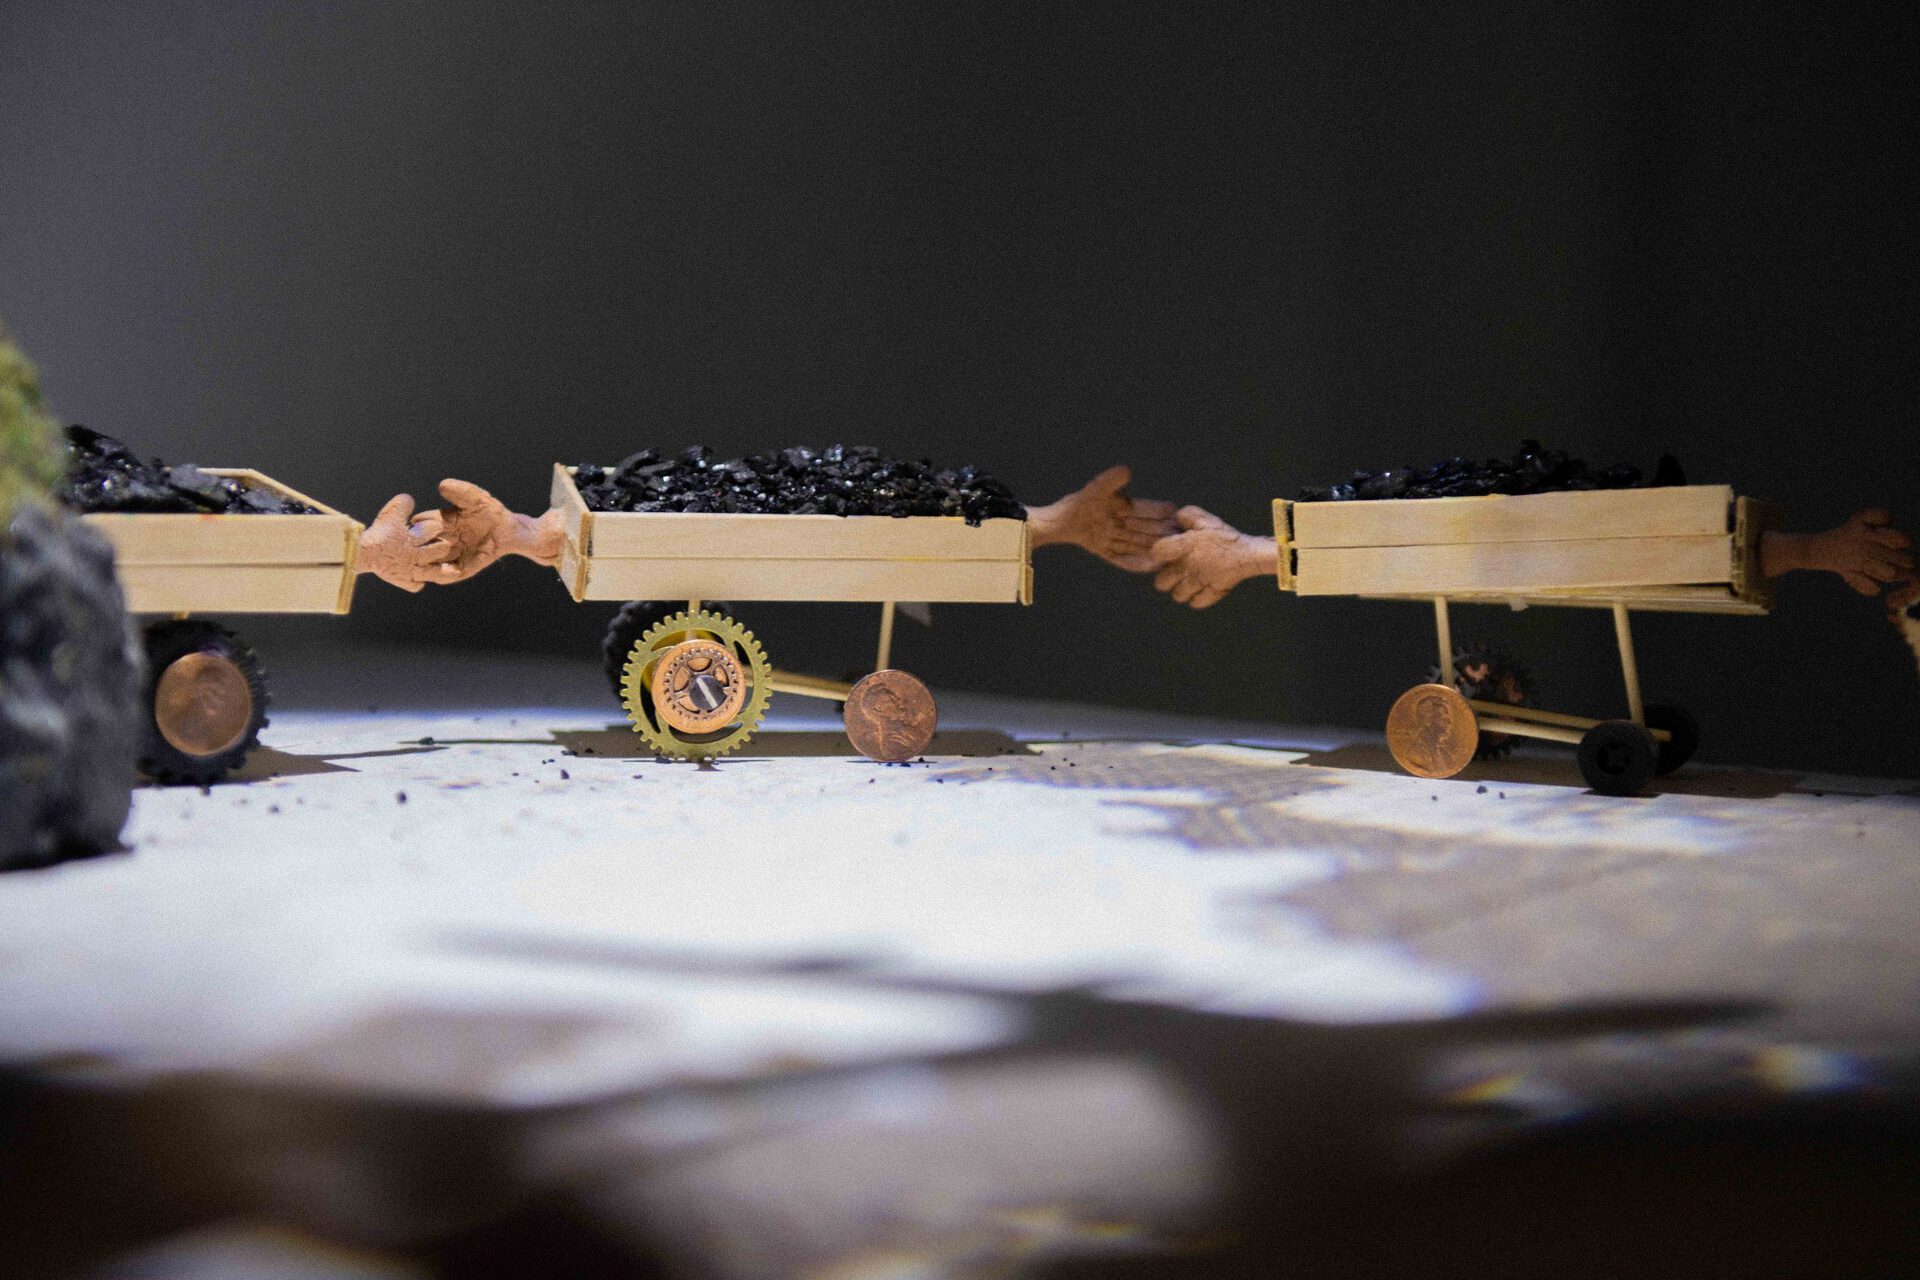 Detail shot of Community Meeting, 2020, 3'8" x 3' x 2'5", wire, coal, popsicle sticks, toothpicks, Static grass, clay, pennies, watch gears, toy wheels, office chair wheels, wood, house paint, spotlight, moon transparency